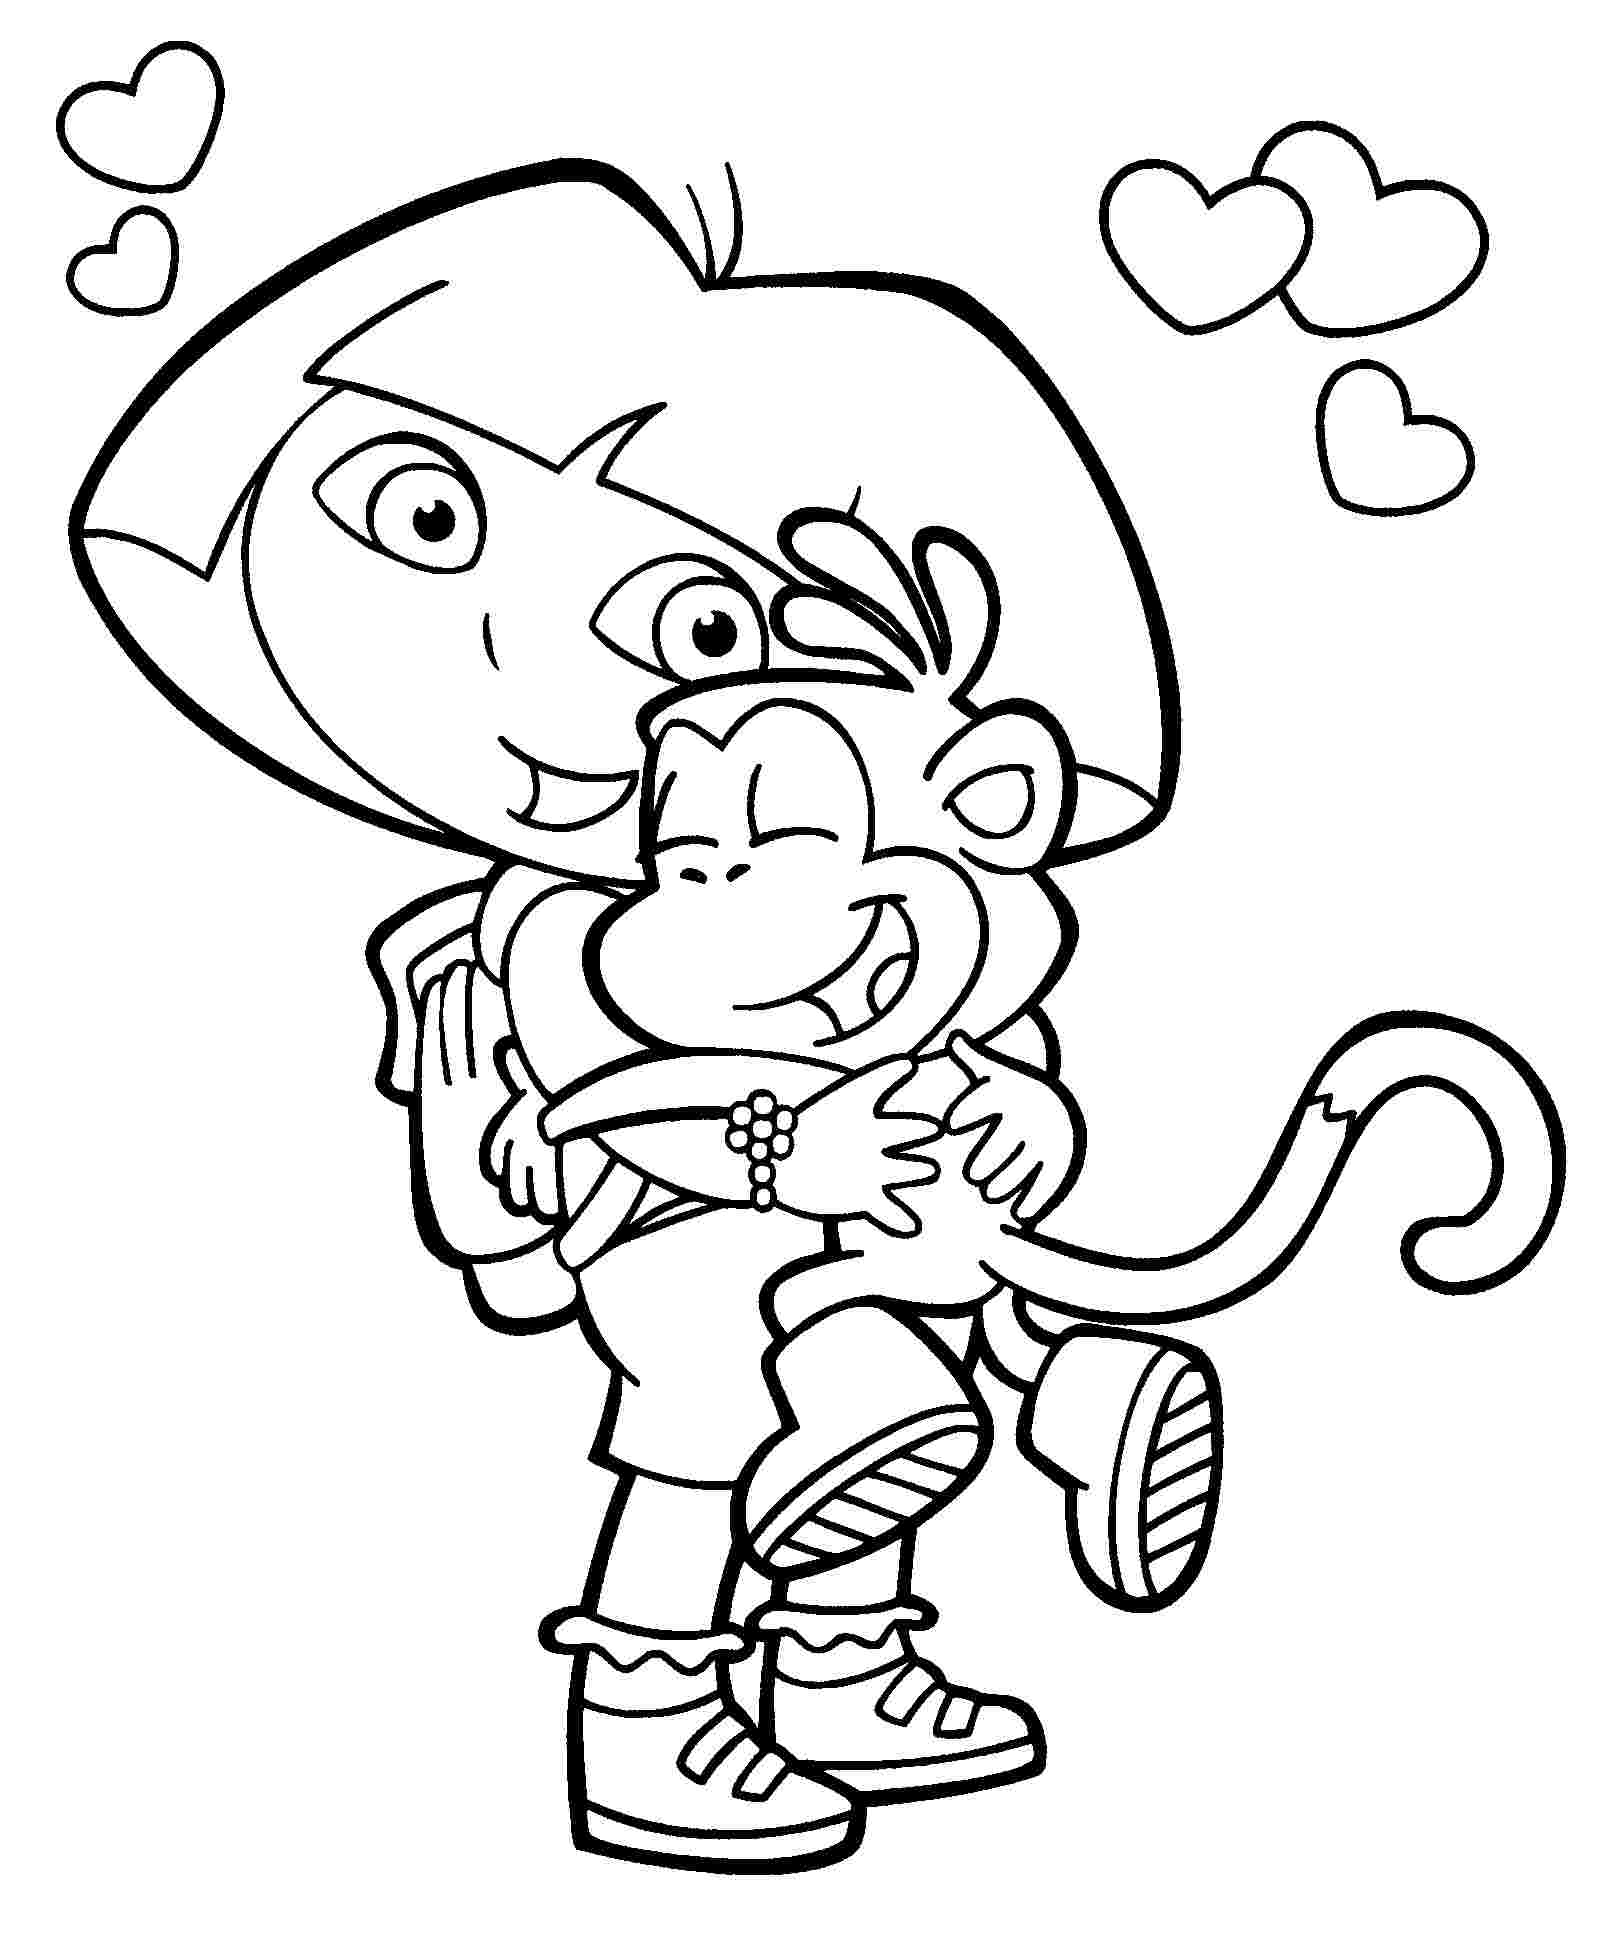 dora coloring pages games dora coloring pages diego coloring ...